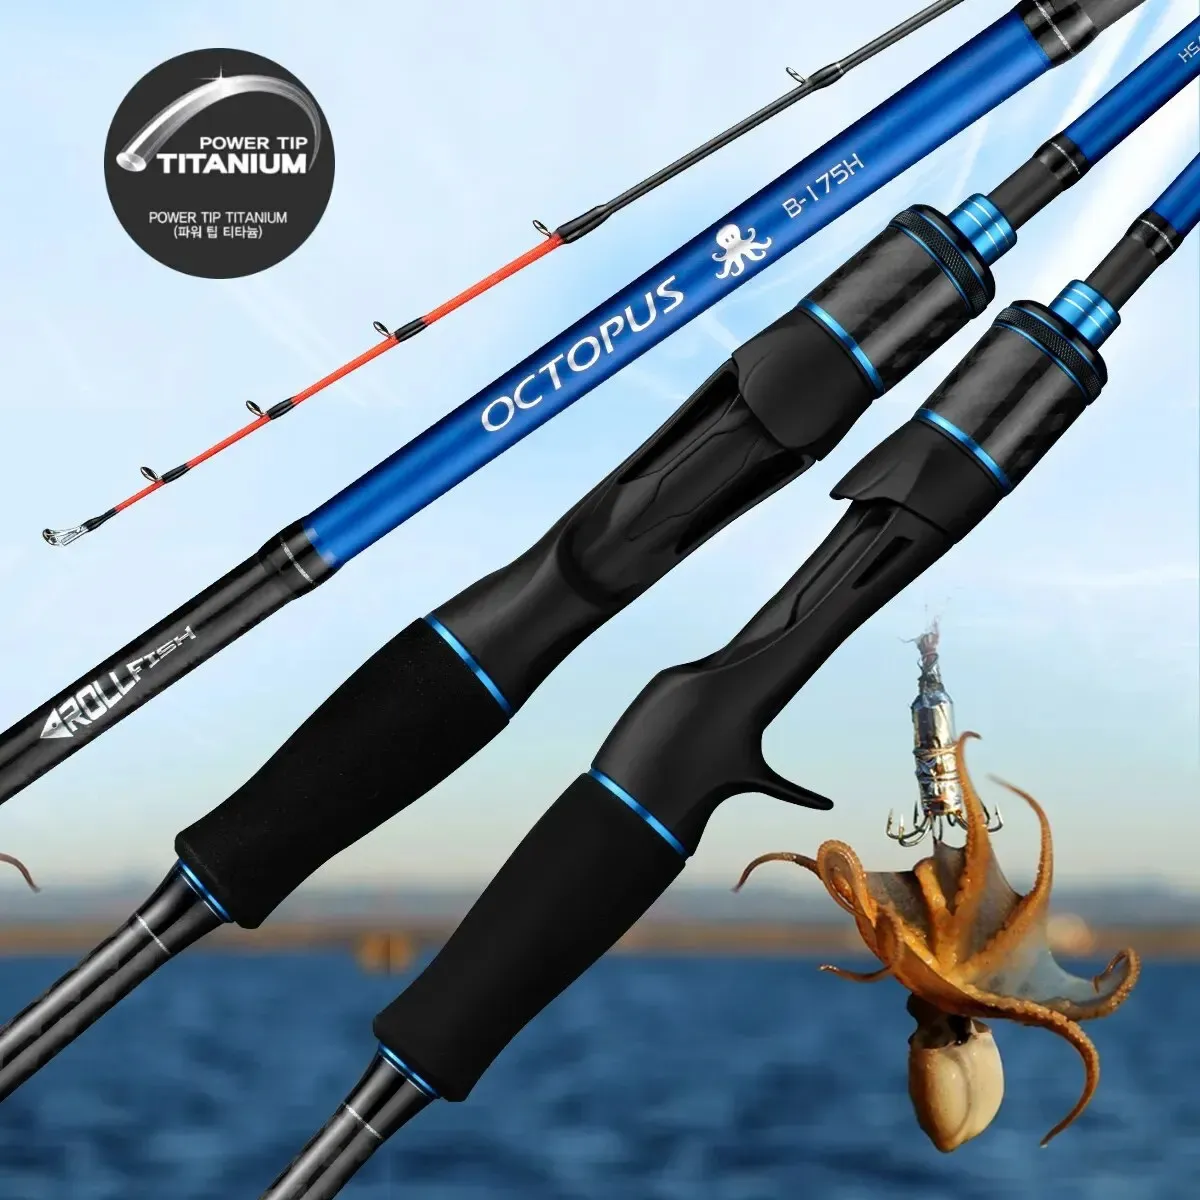 Boat Fishing Rods Fishing Rod For Casting Jigging Rod 1.75m Hard Power  Jigging Rod Powerful Tip Rod For Octopus Boat Rod High Quality 231016 From  Bao05, $24.25